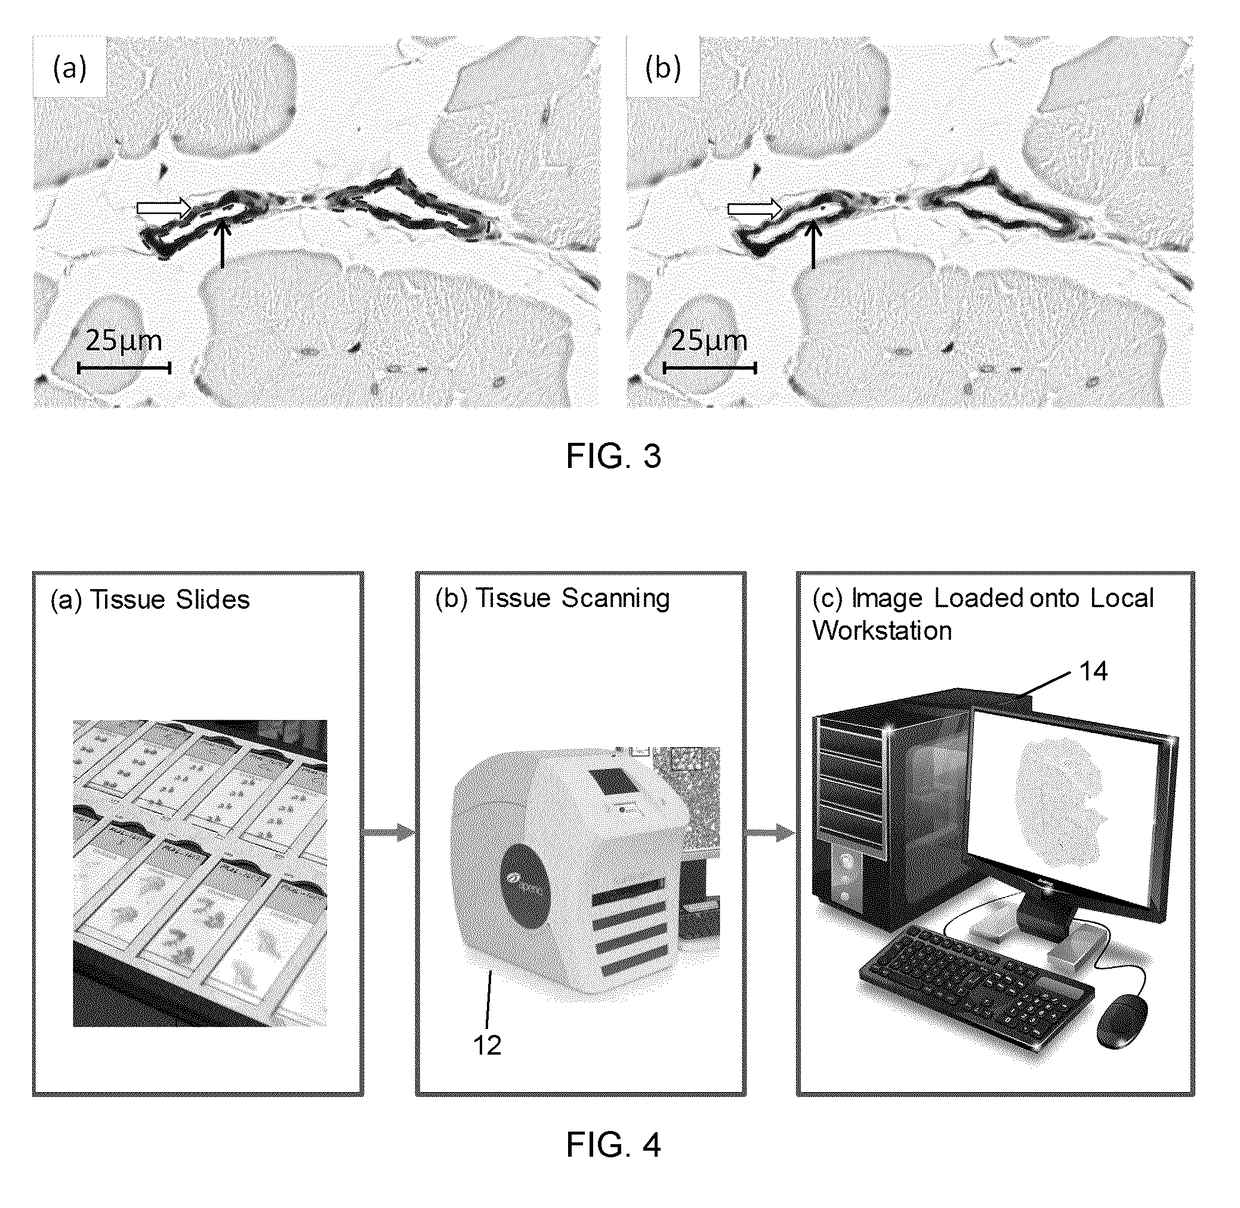 Automated segmentation of histological sections for vasculature quantification